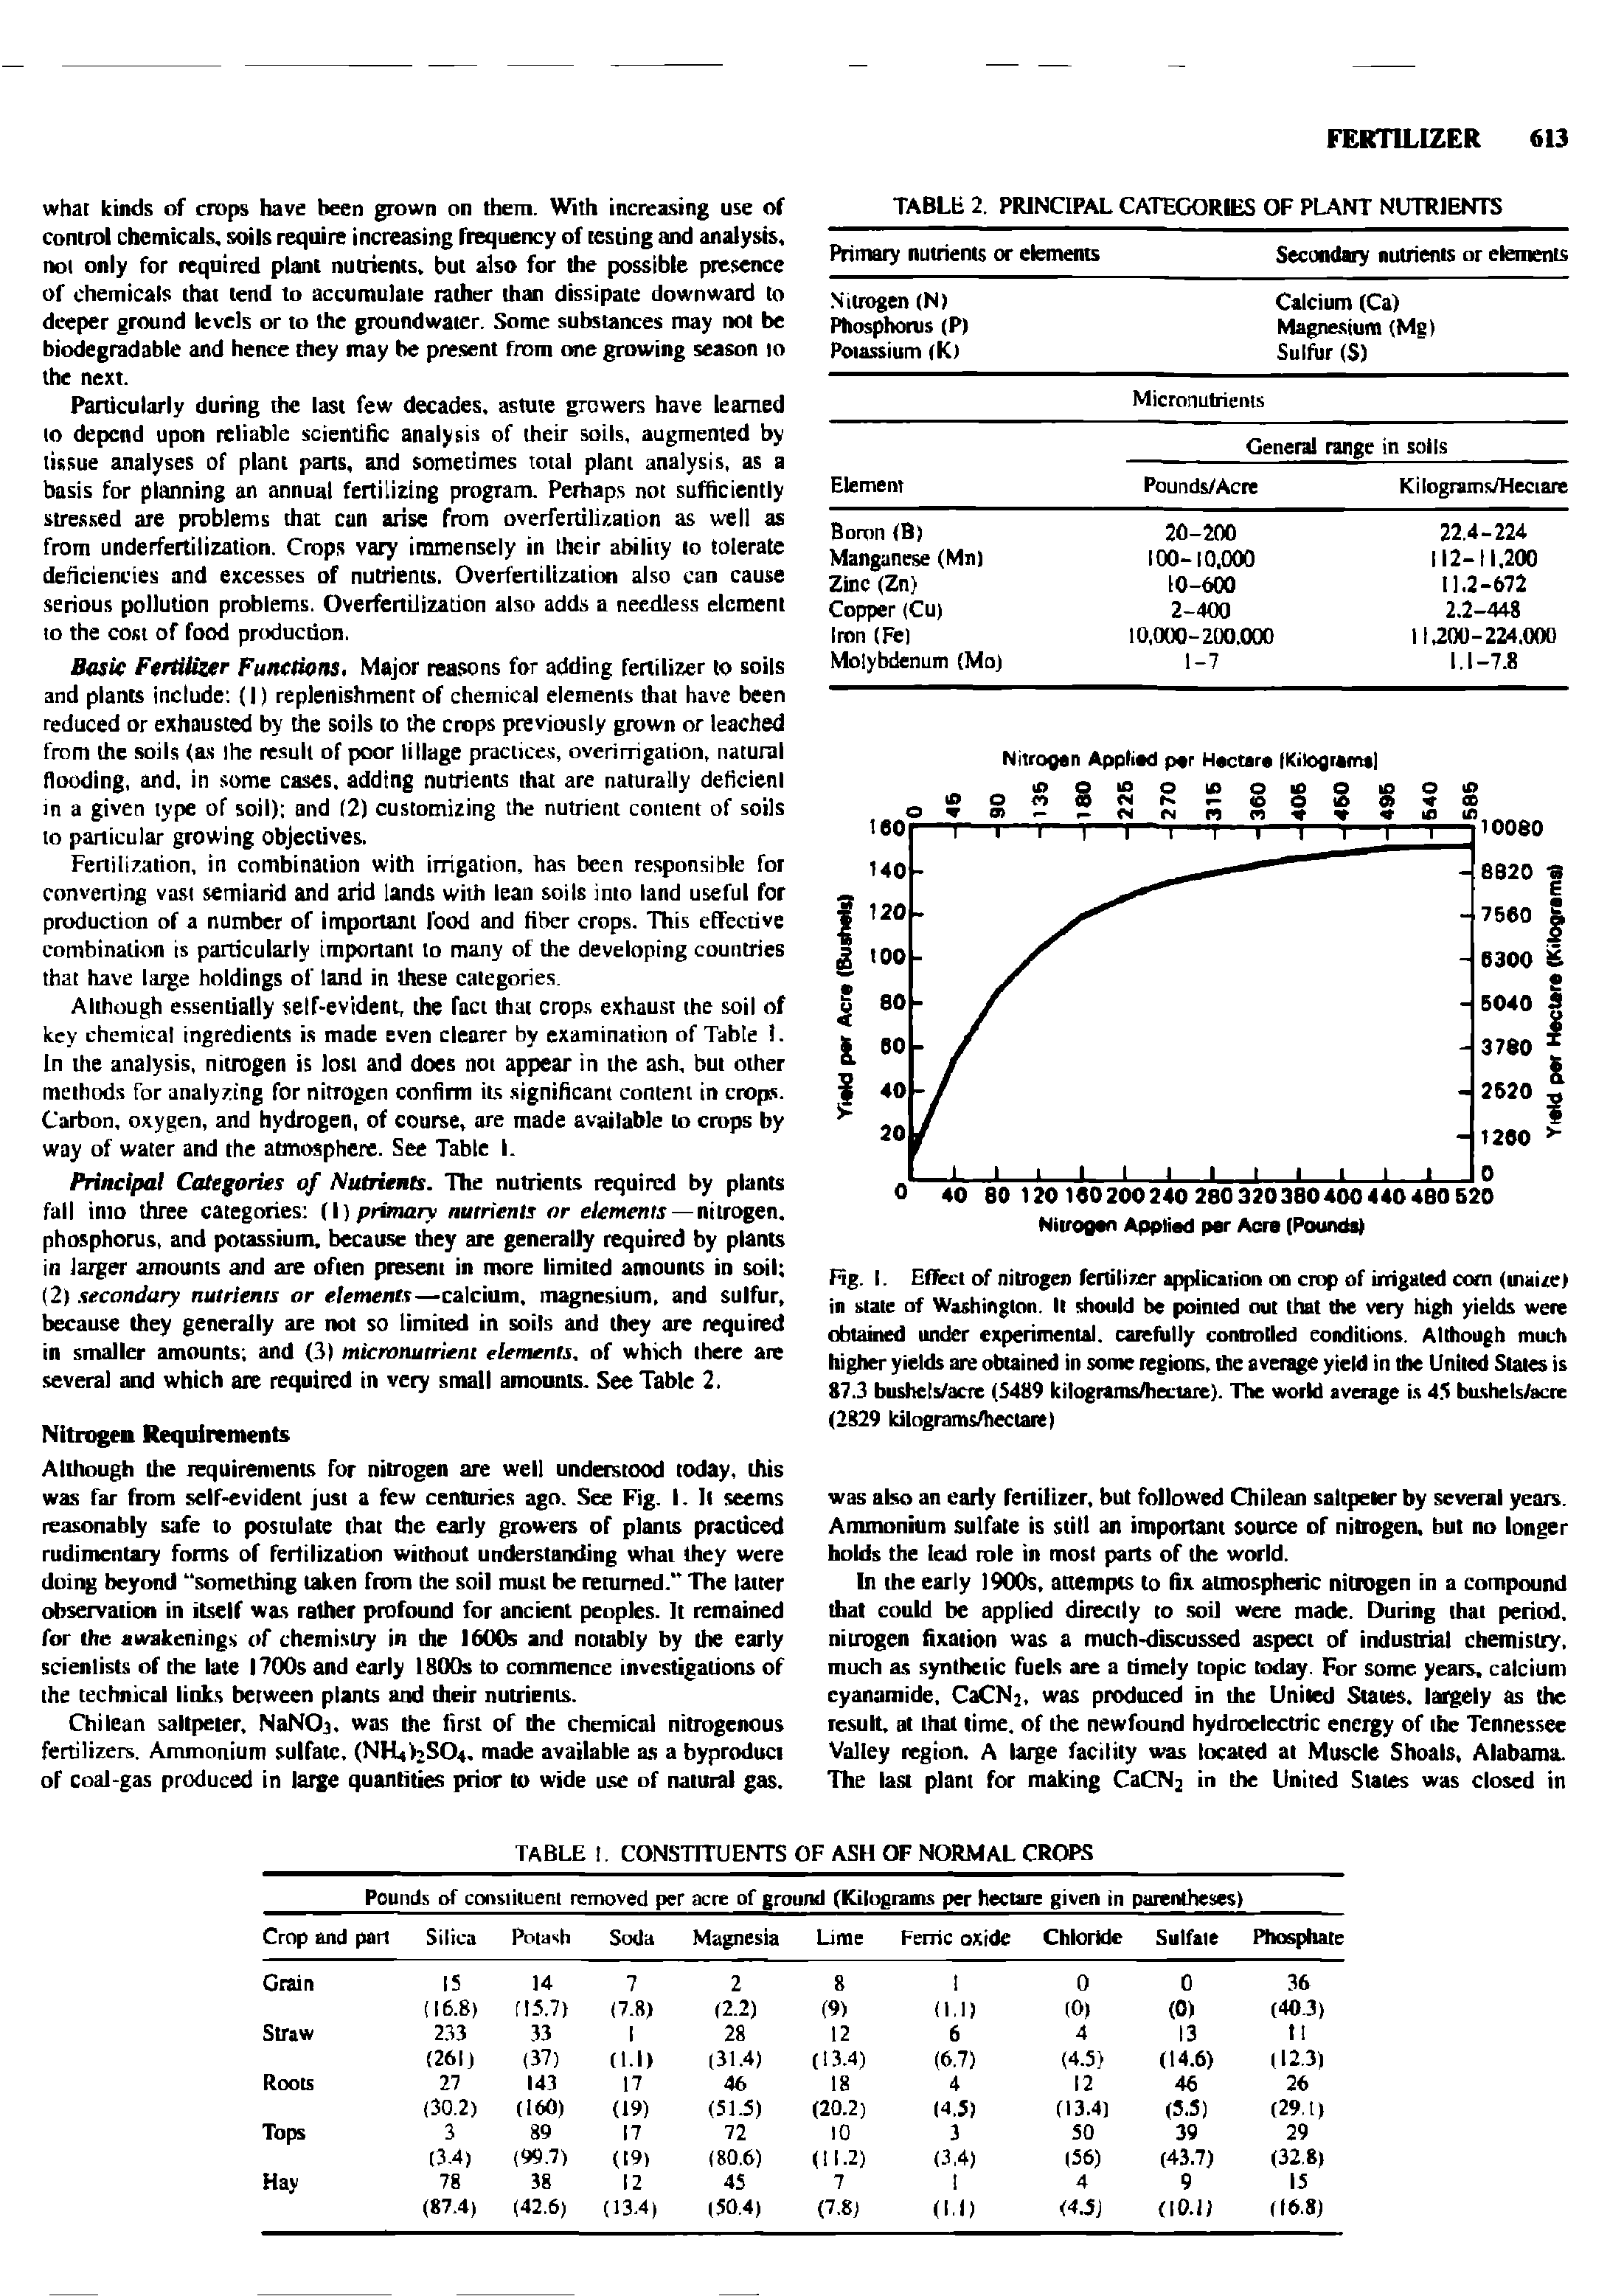 Fig. I. Effect of nitrogen fertilizer application on crop of irrigated com (maize) in state of Washington. It should be pointed out that the very high yields were obtained under experimental, carefully controlled conditions. Although much higher yields are obtained in some regions, the average yield in the United States is 87.3 bushels/acre (5489 kilograms/hectare). The world average is 45 bushels/acre (2829 kilograms/hectare)...